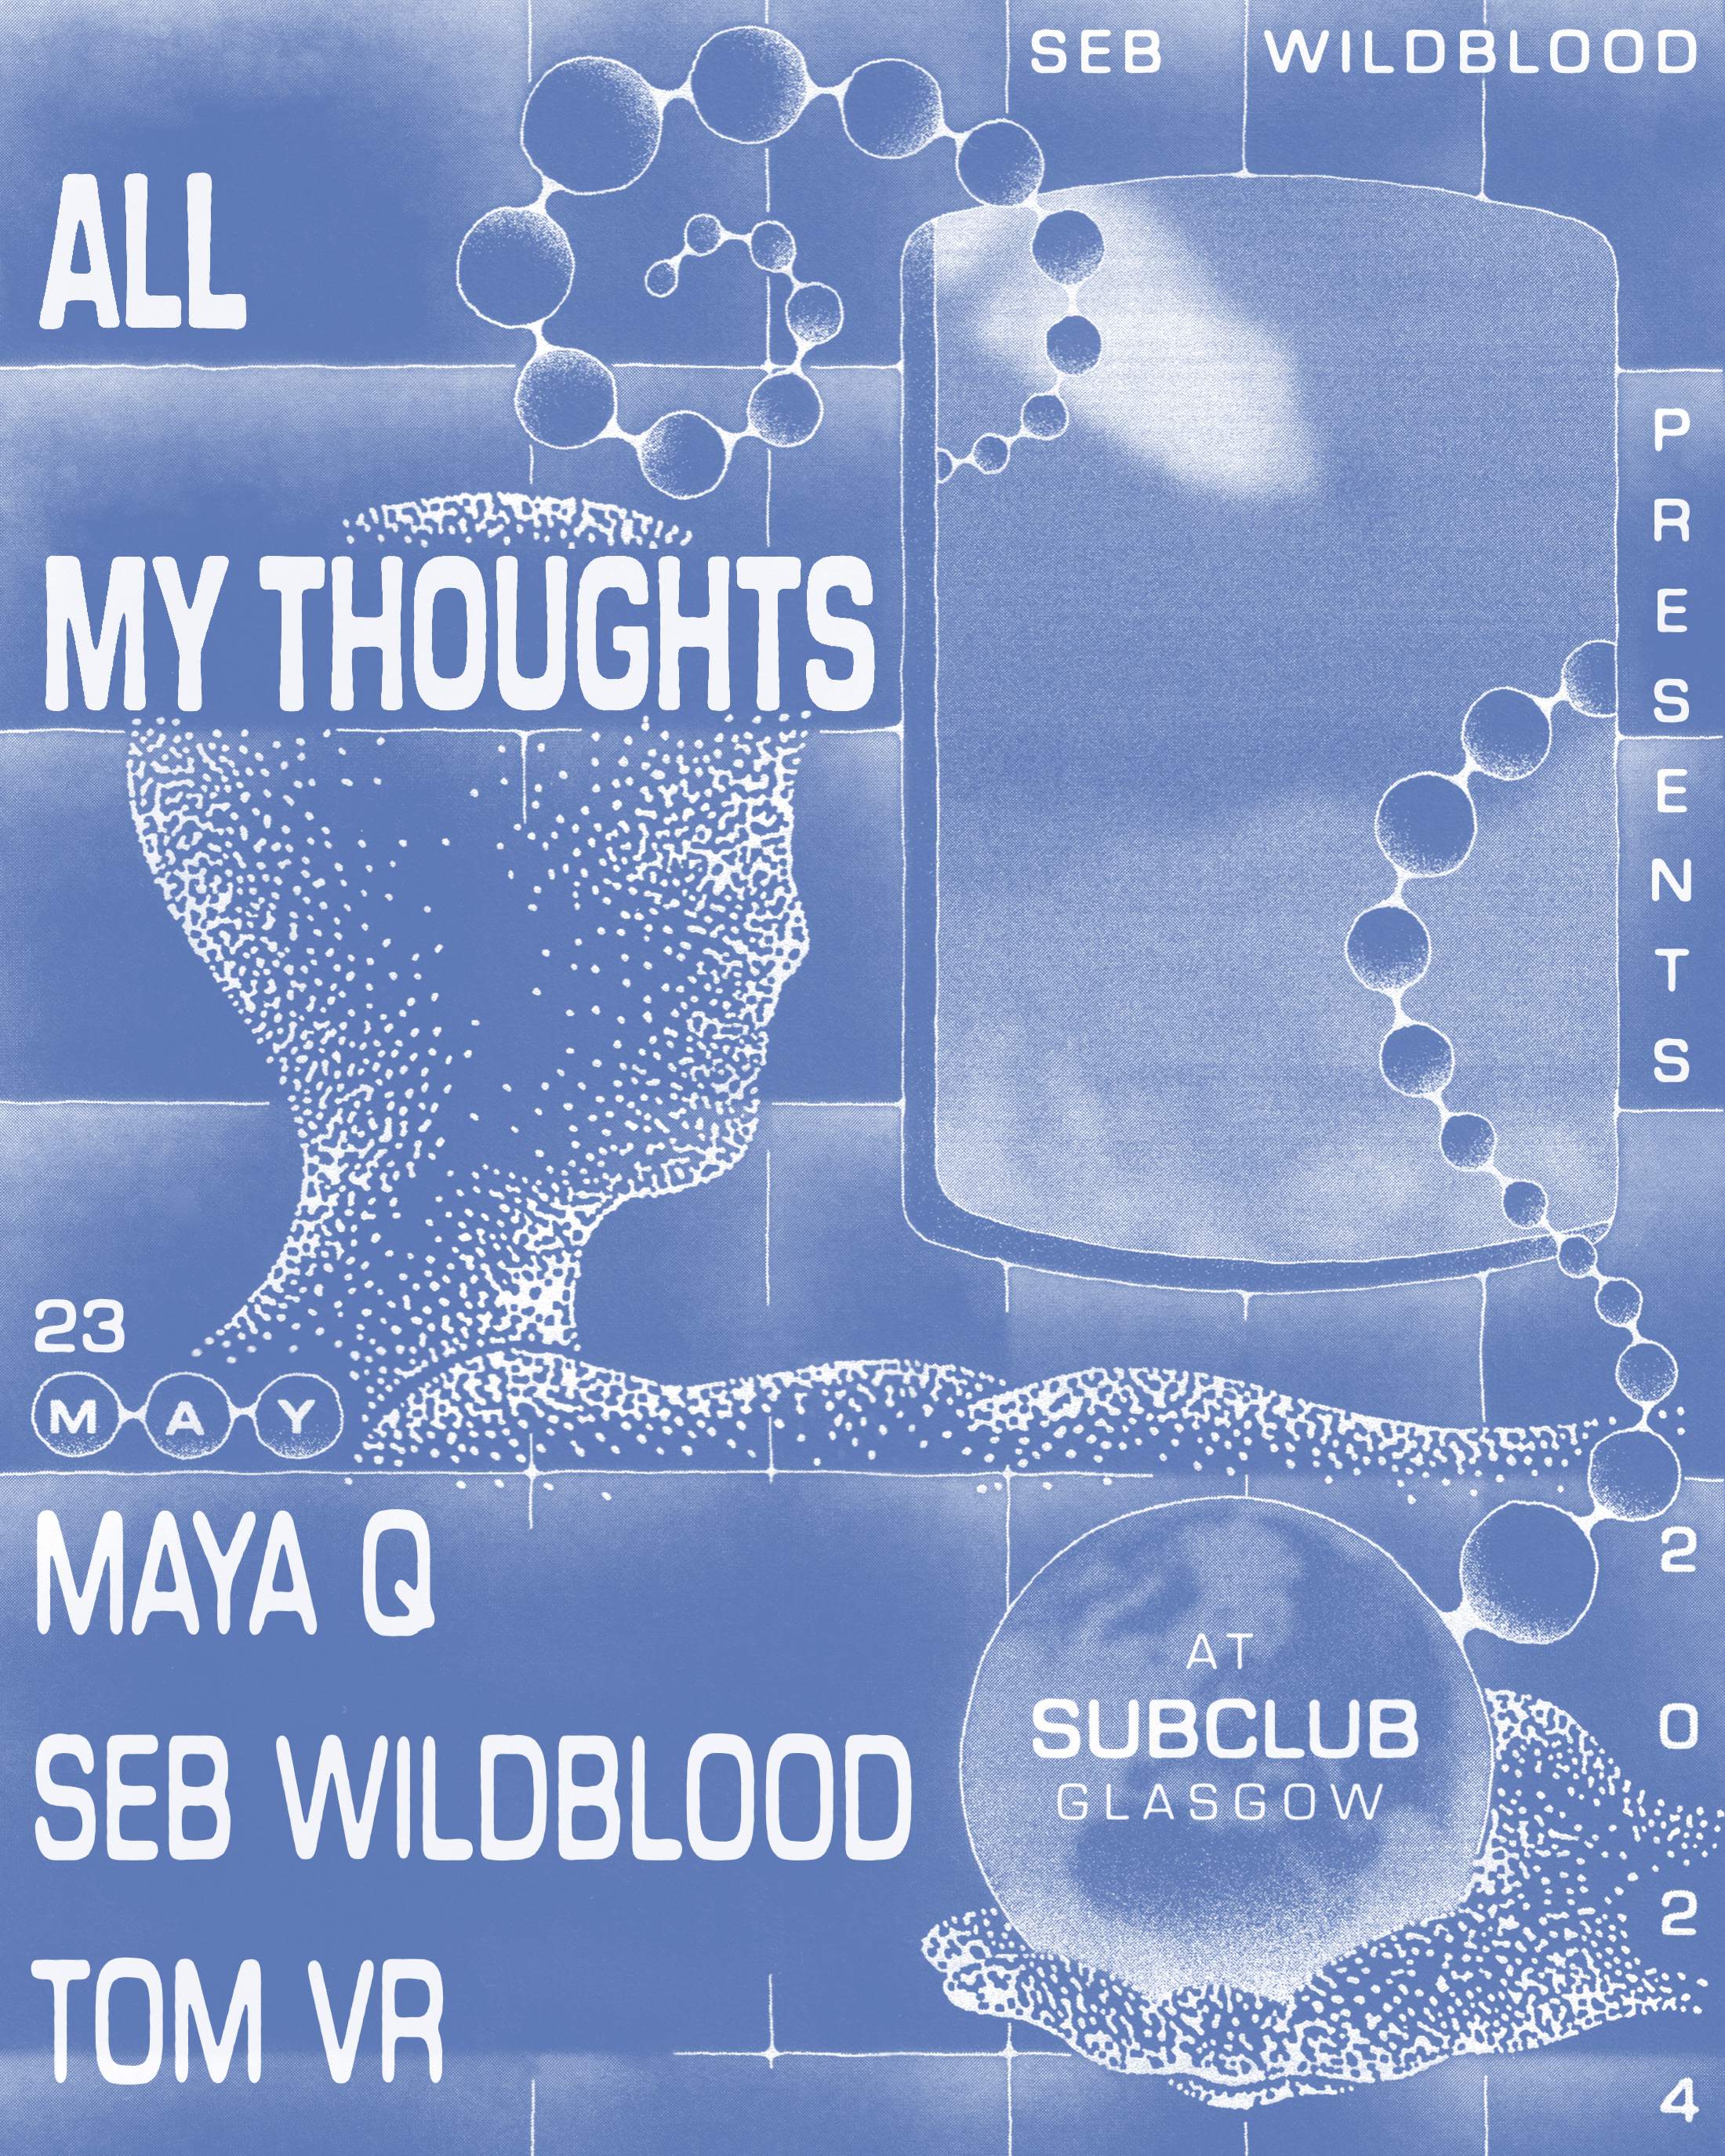 [RESCHEDULED] all my thoughts - label night  - フライヤー表